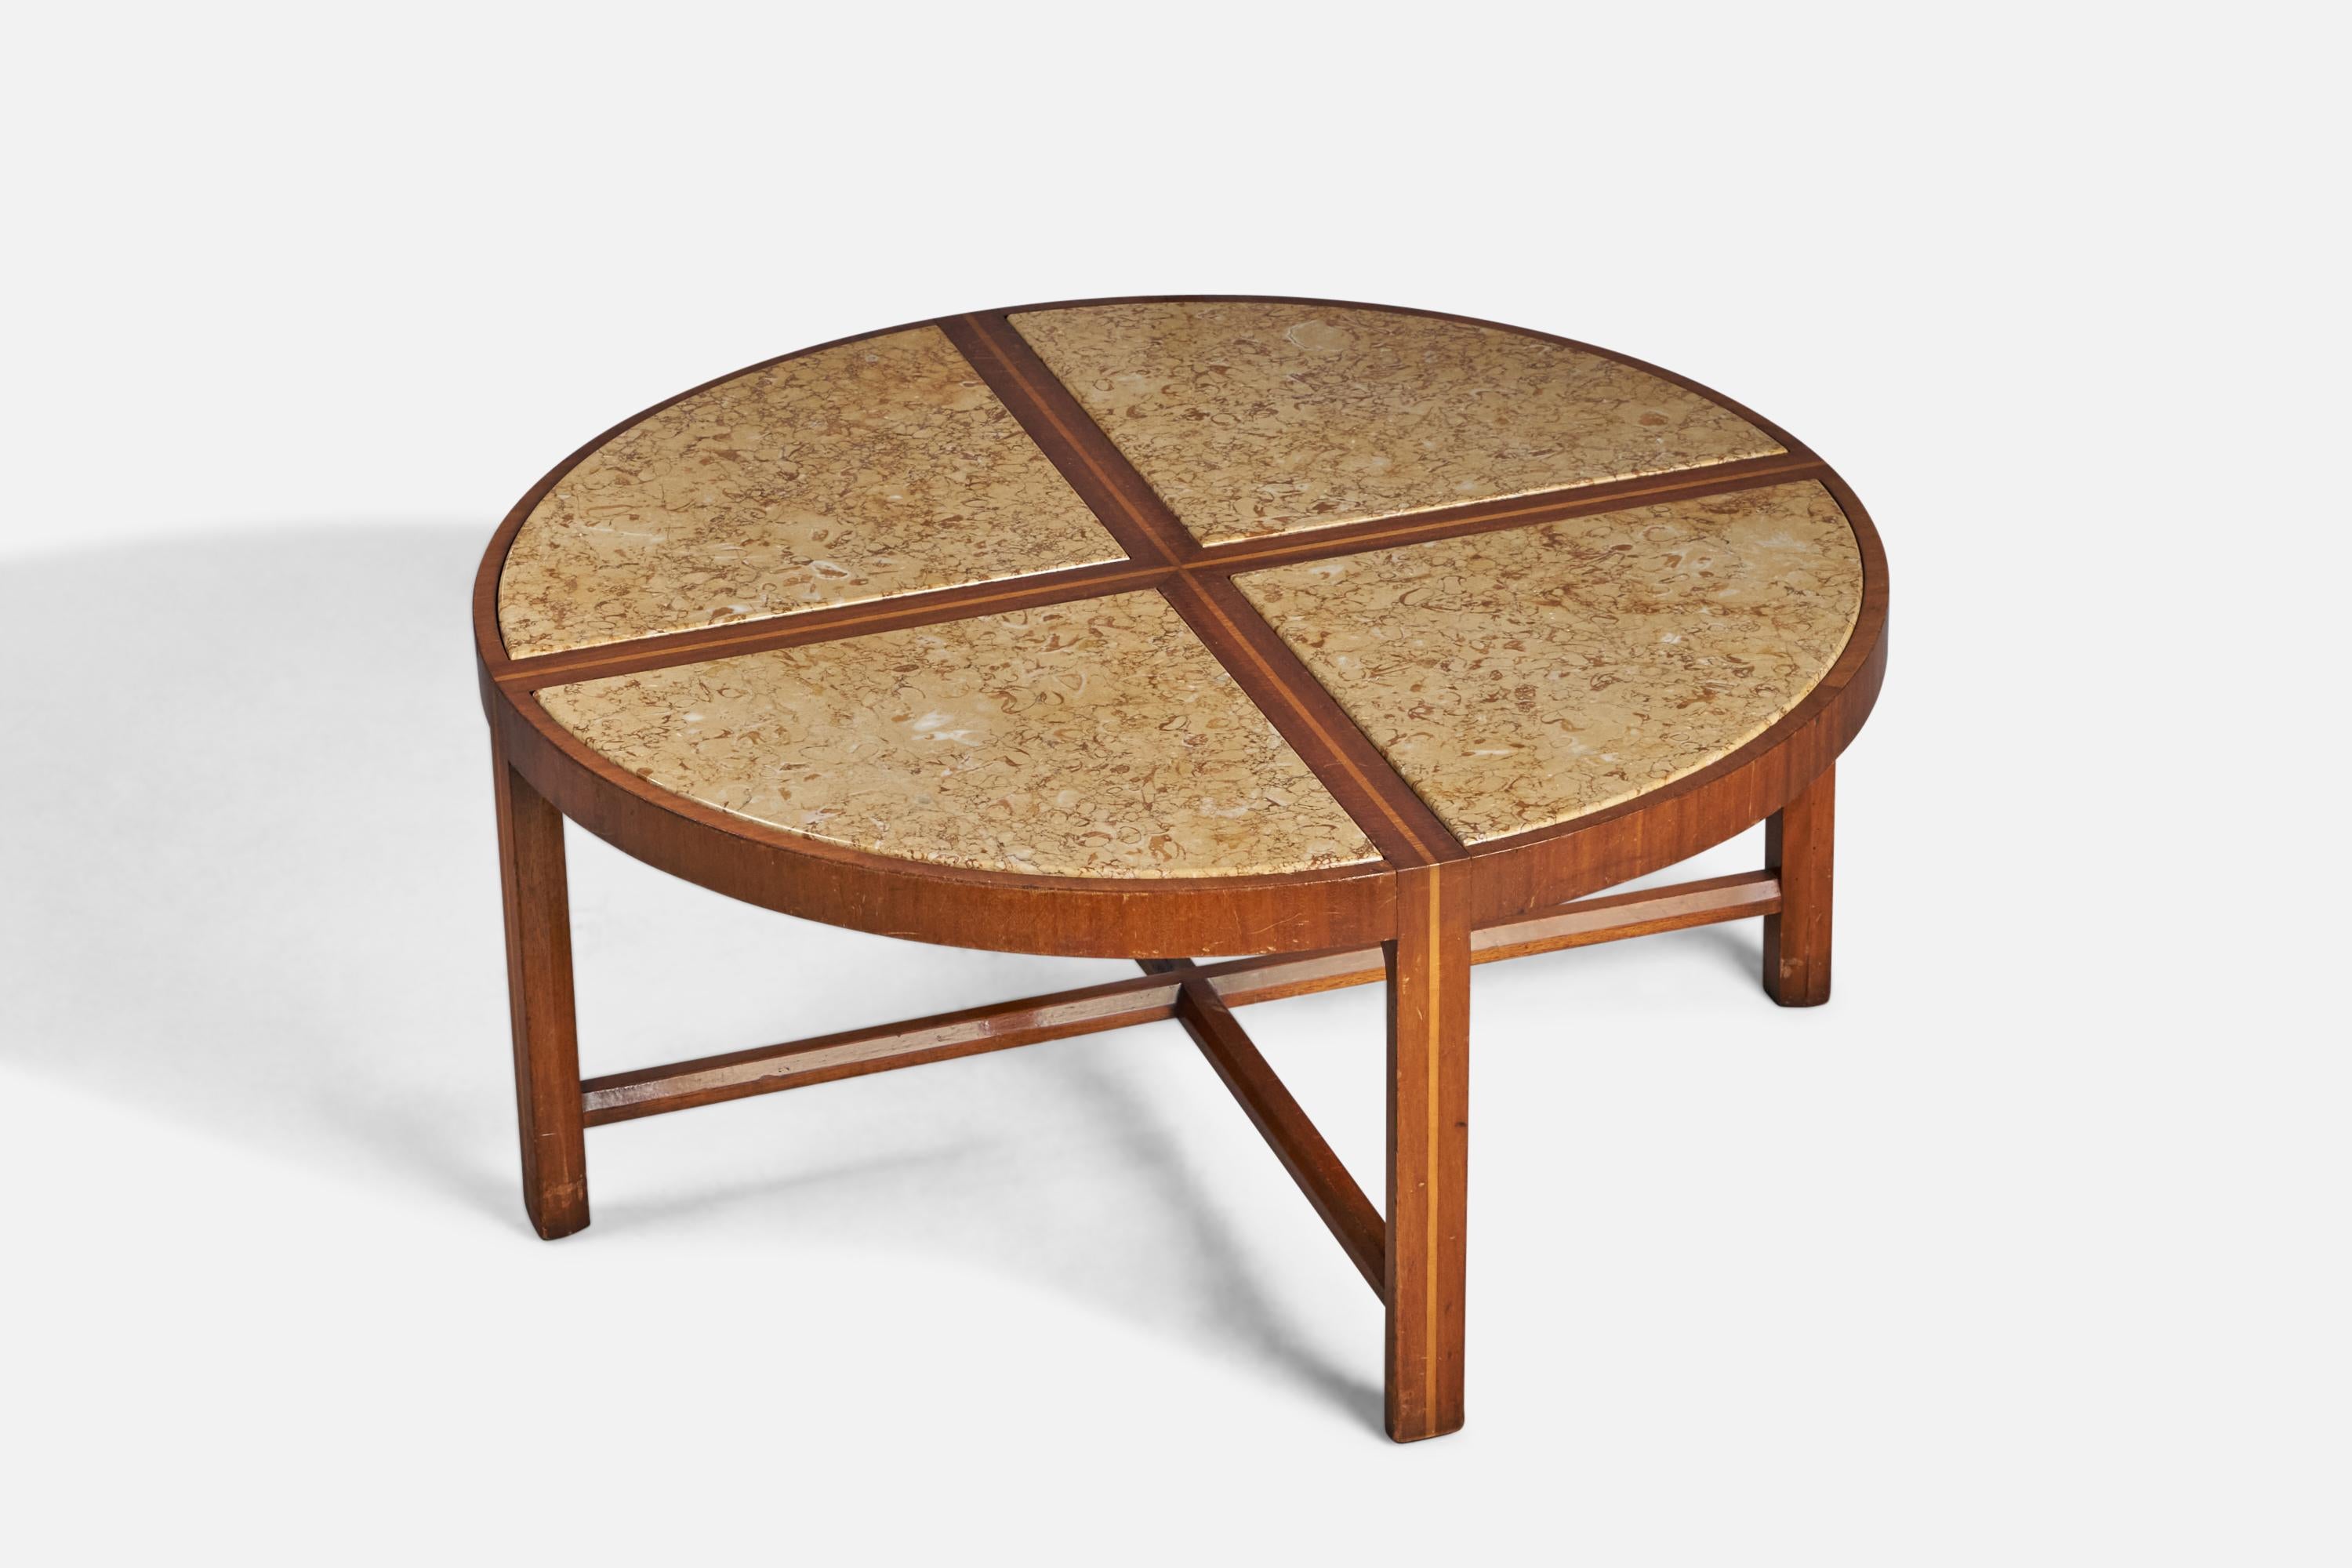 A walnut and beige travertine coffee table with light wood inlays, designed by Tommi Parzinger and produced by Charak Modern, USA, 1950s.
 